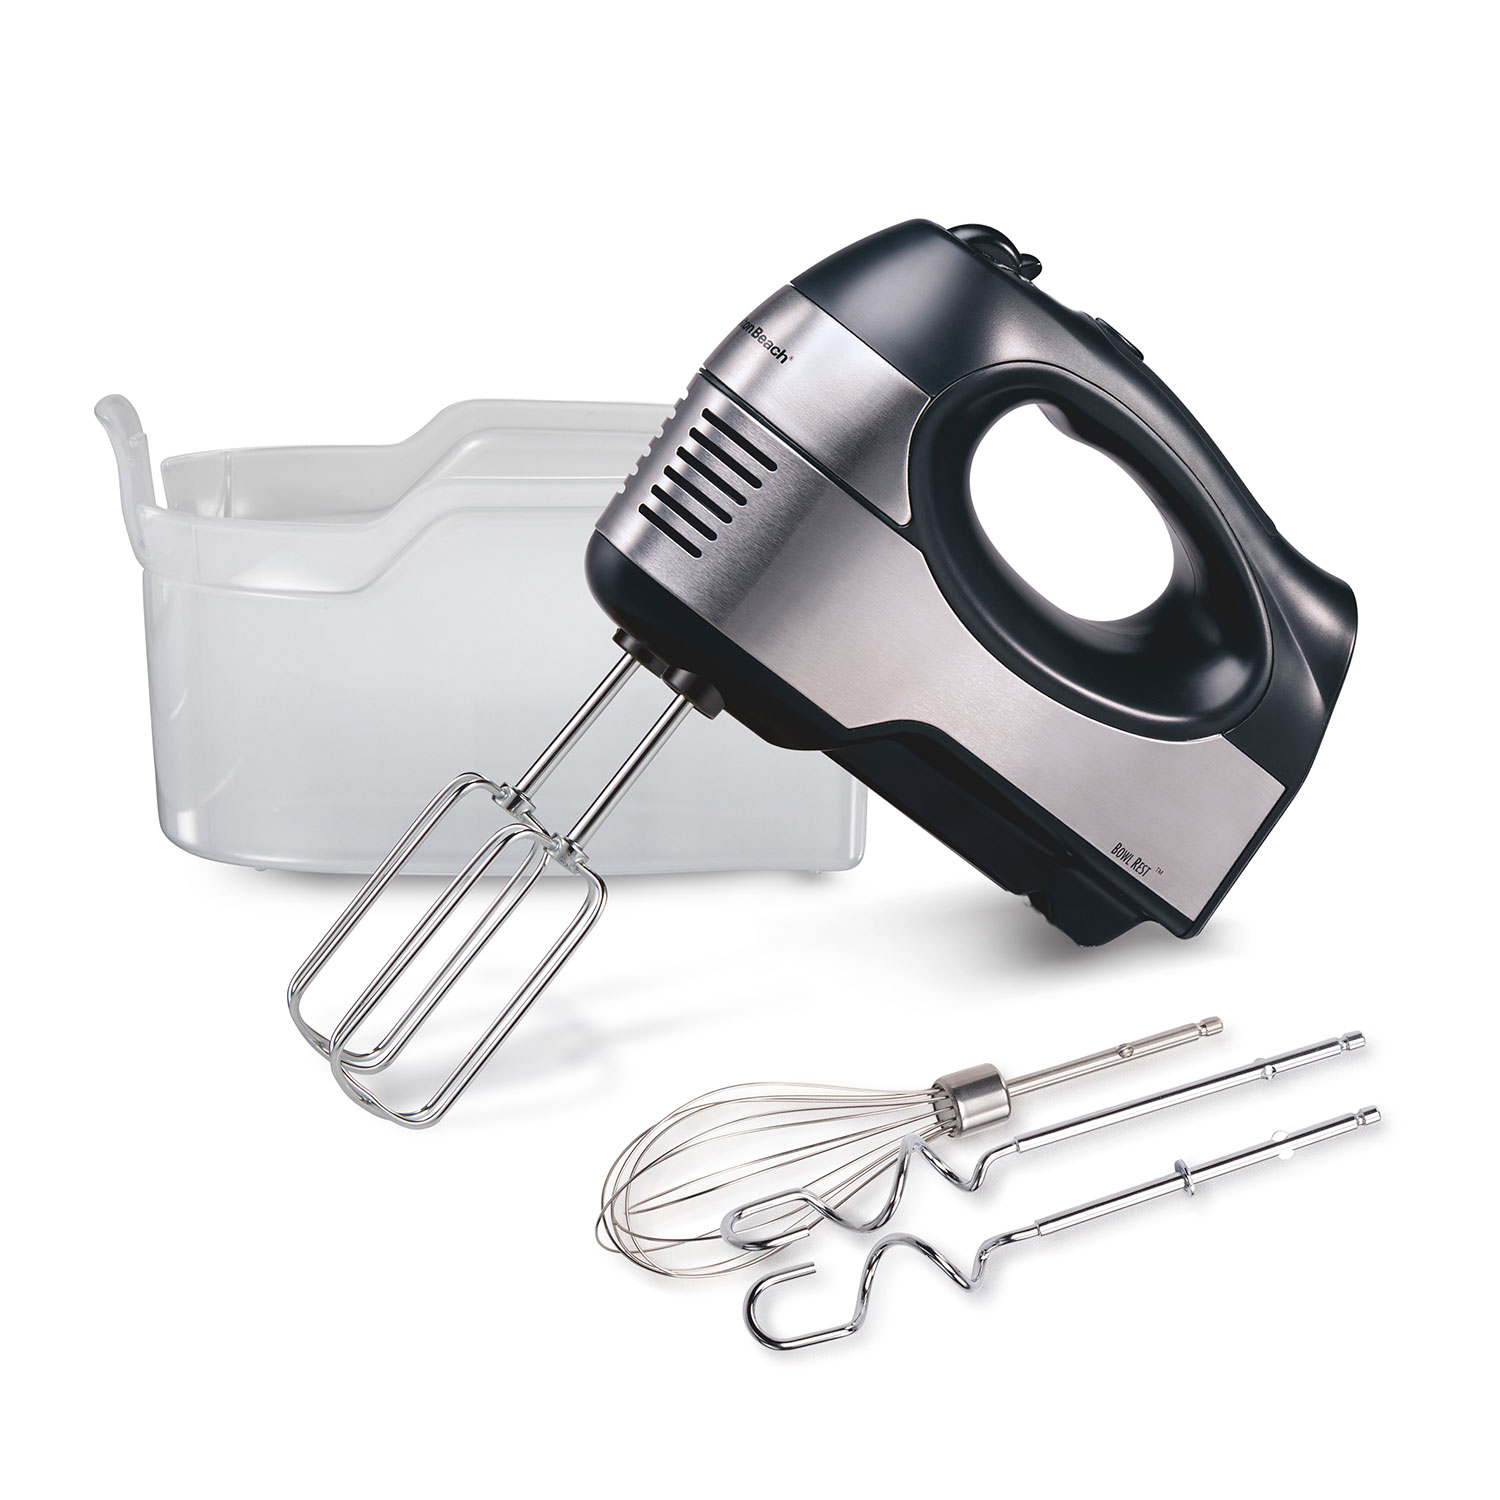 6 Speed Performance Hand Mixer with Case and Attachments (62646FG)